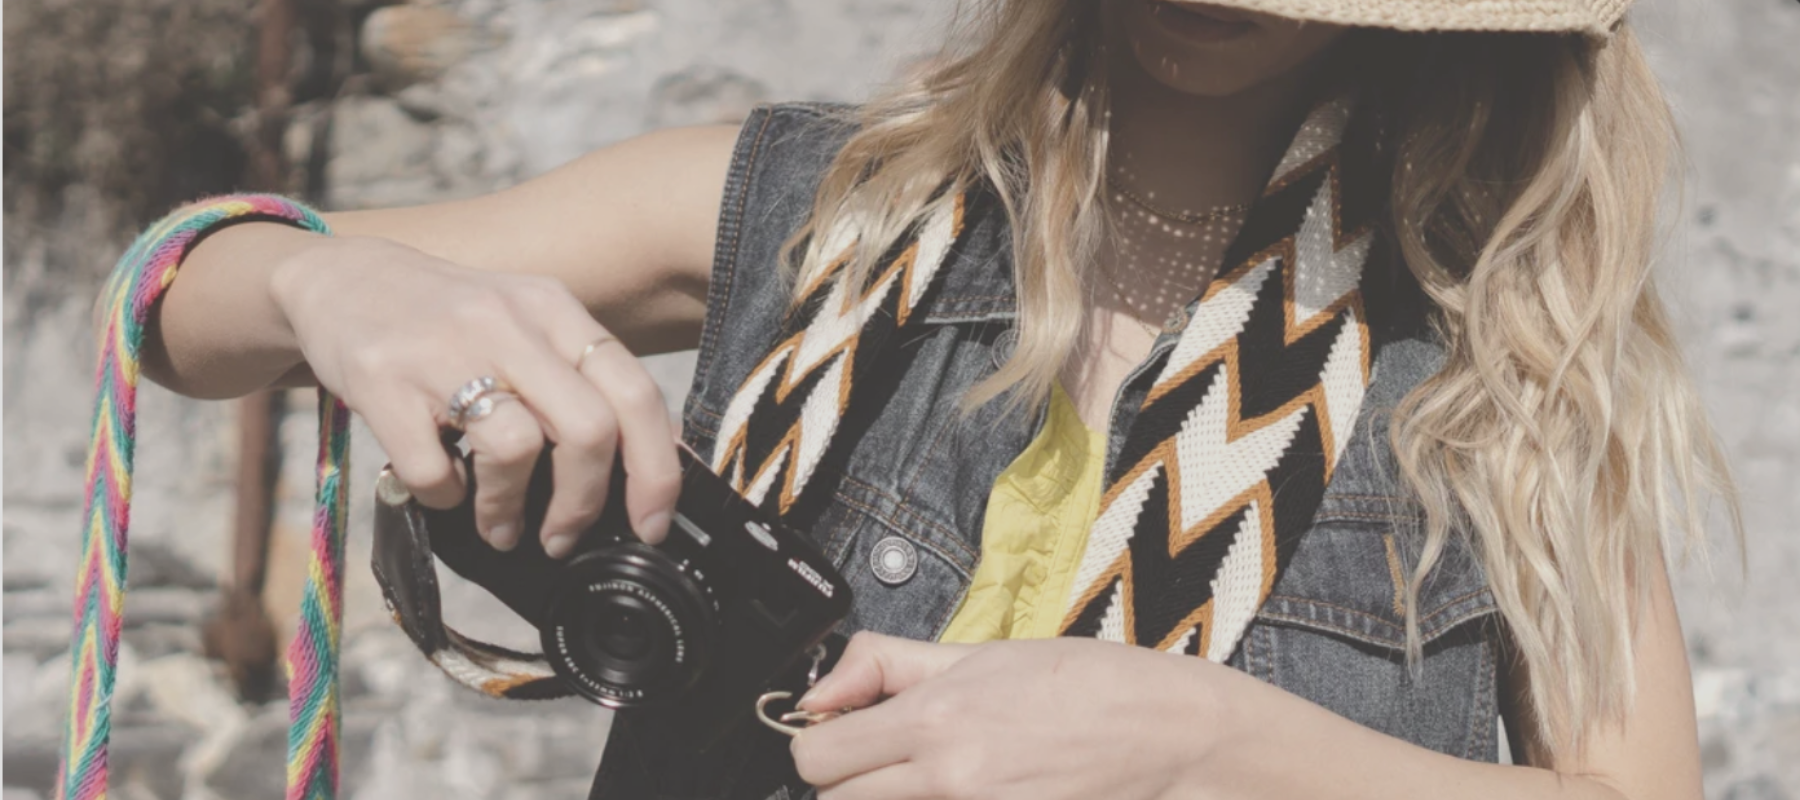 The Impact of Social Media on the Popularity of Boho Style